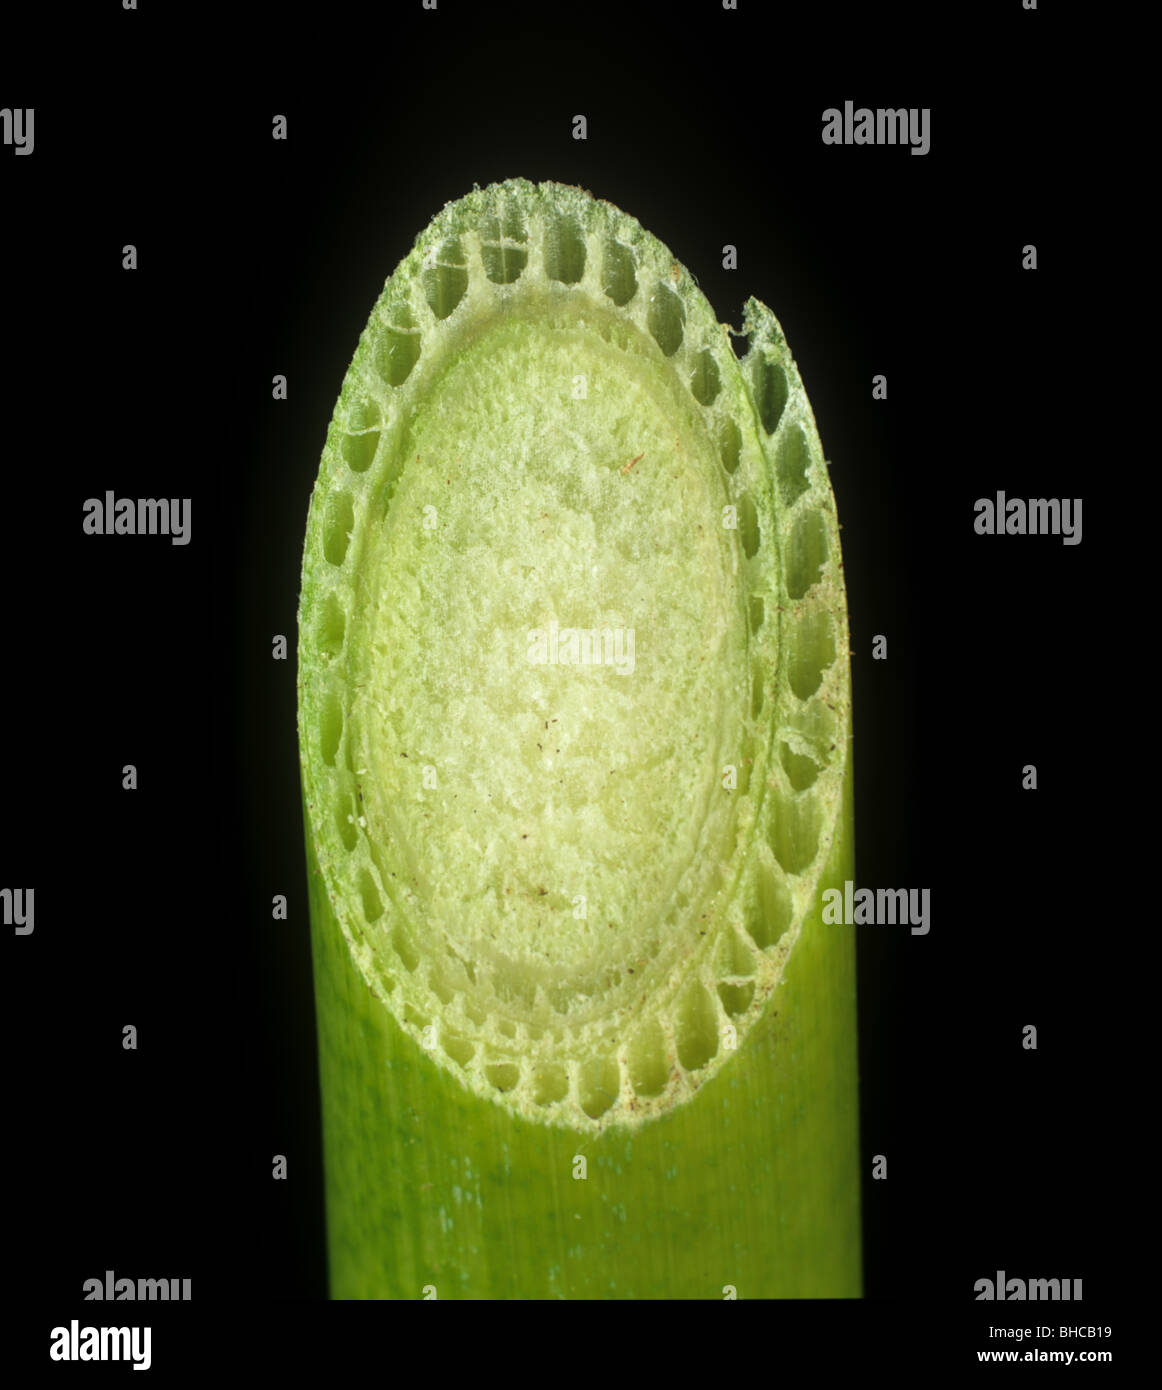 False bulrush (Typha latifolia) stem section showing open structure of a hydrophytic plant Stock Photo